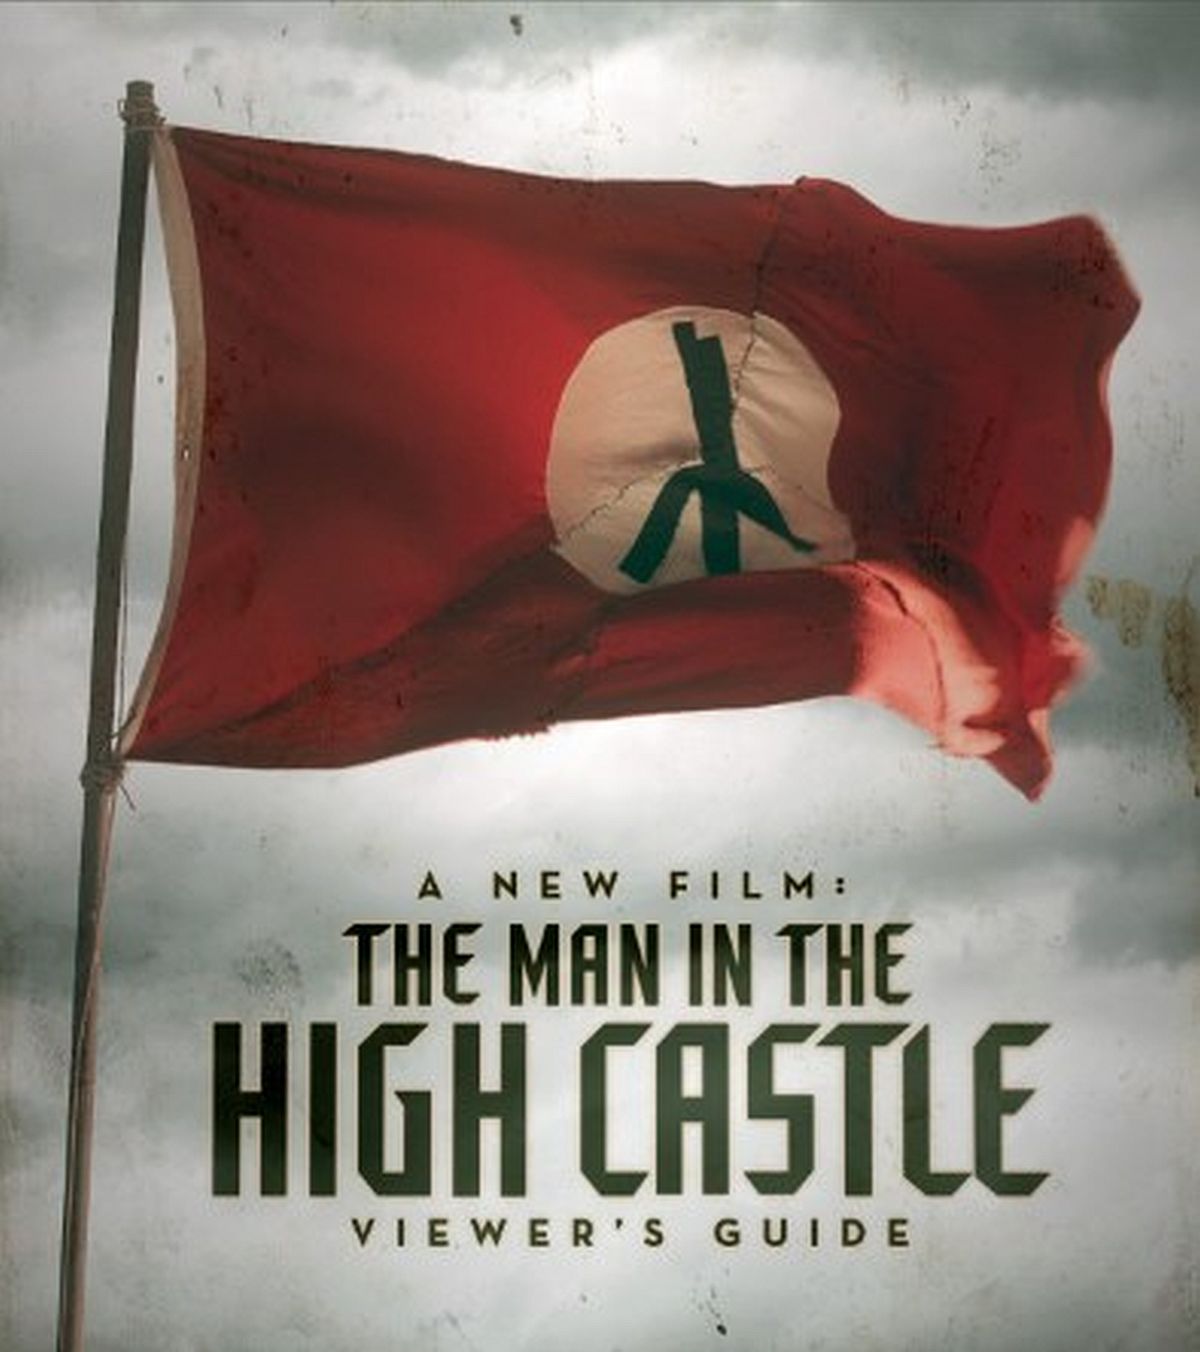 A New Film: The Man in the High Castle Viewer's Guide (2018)